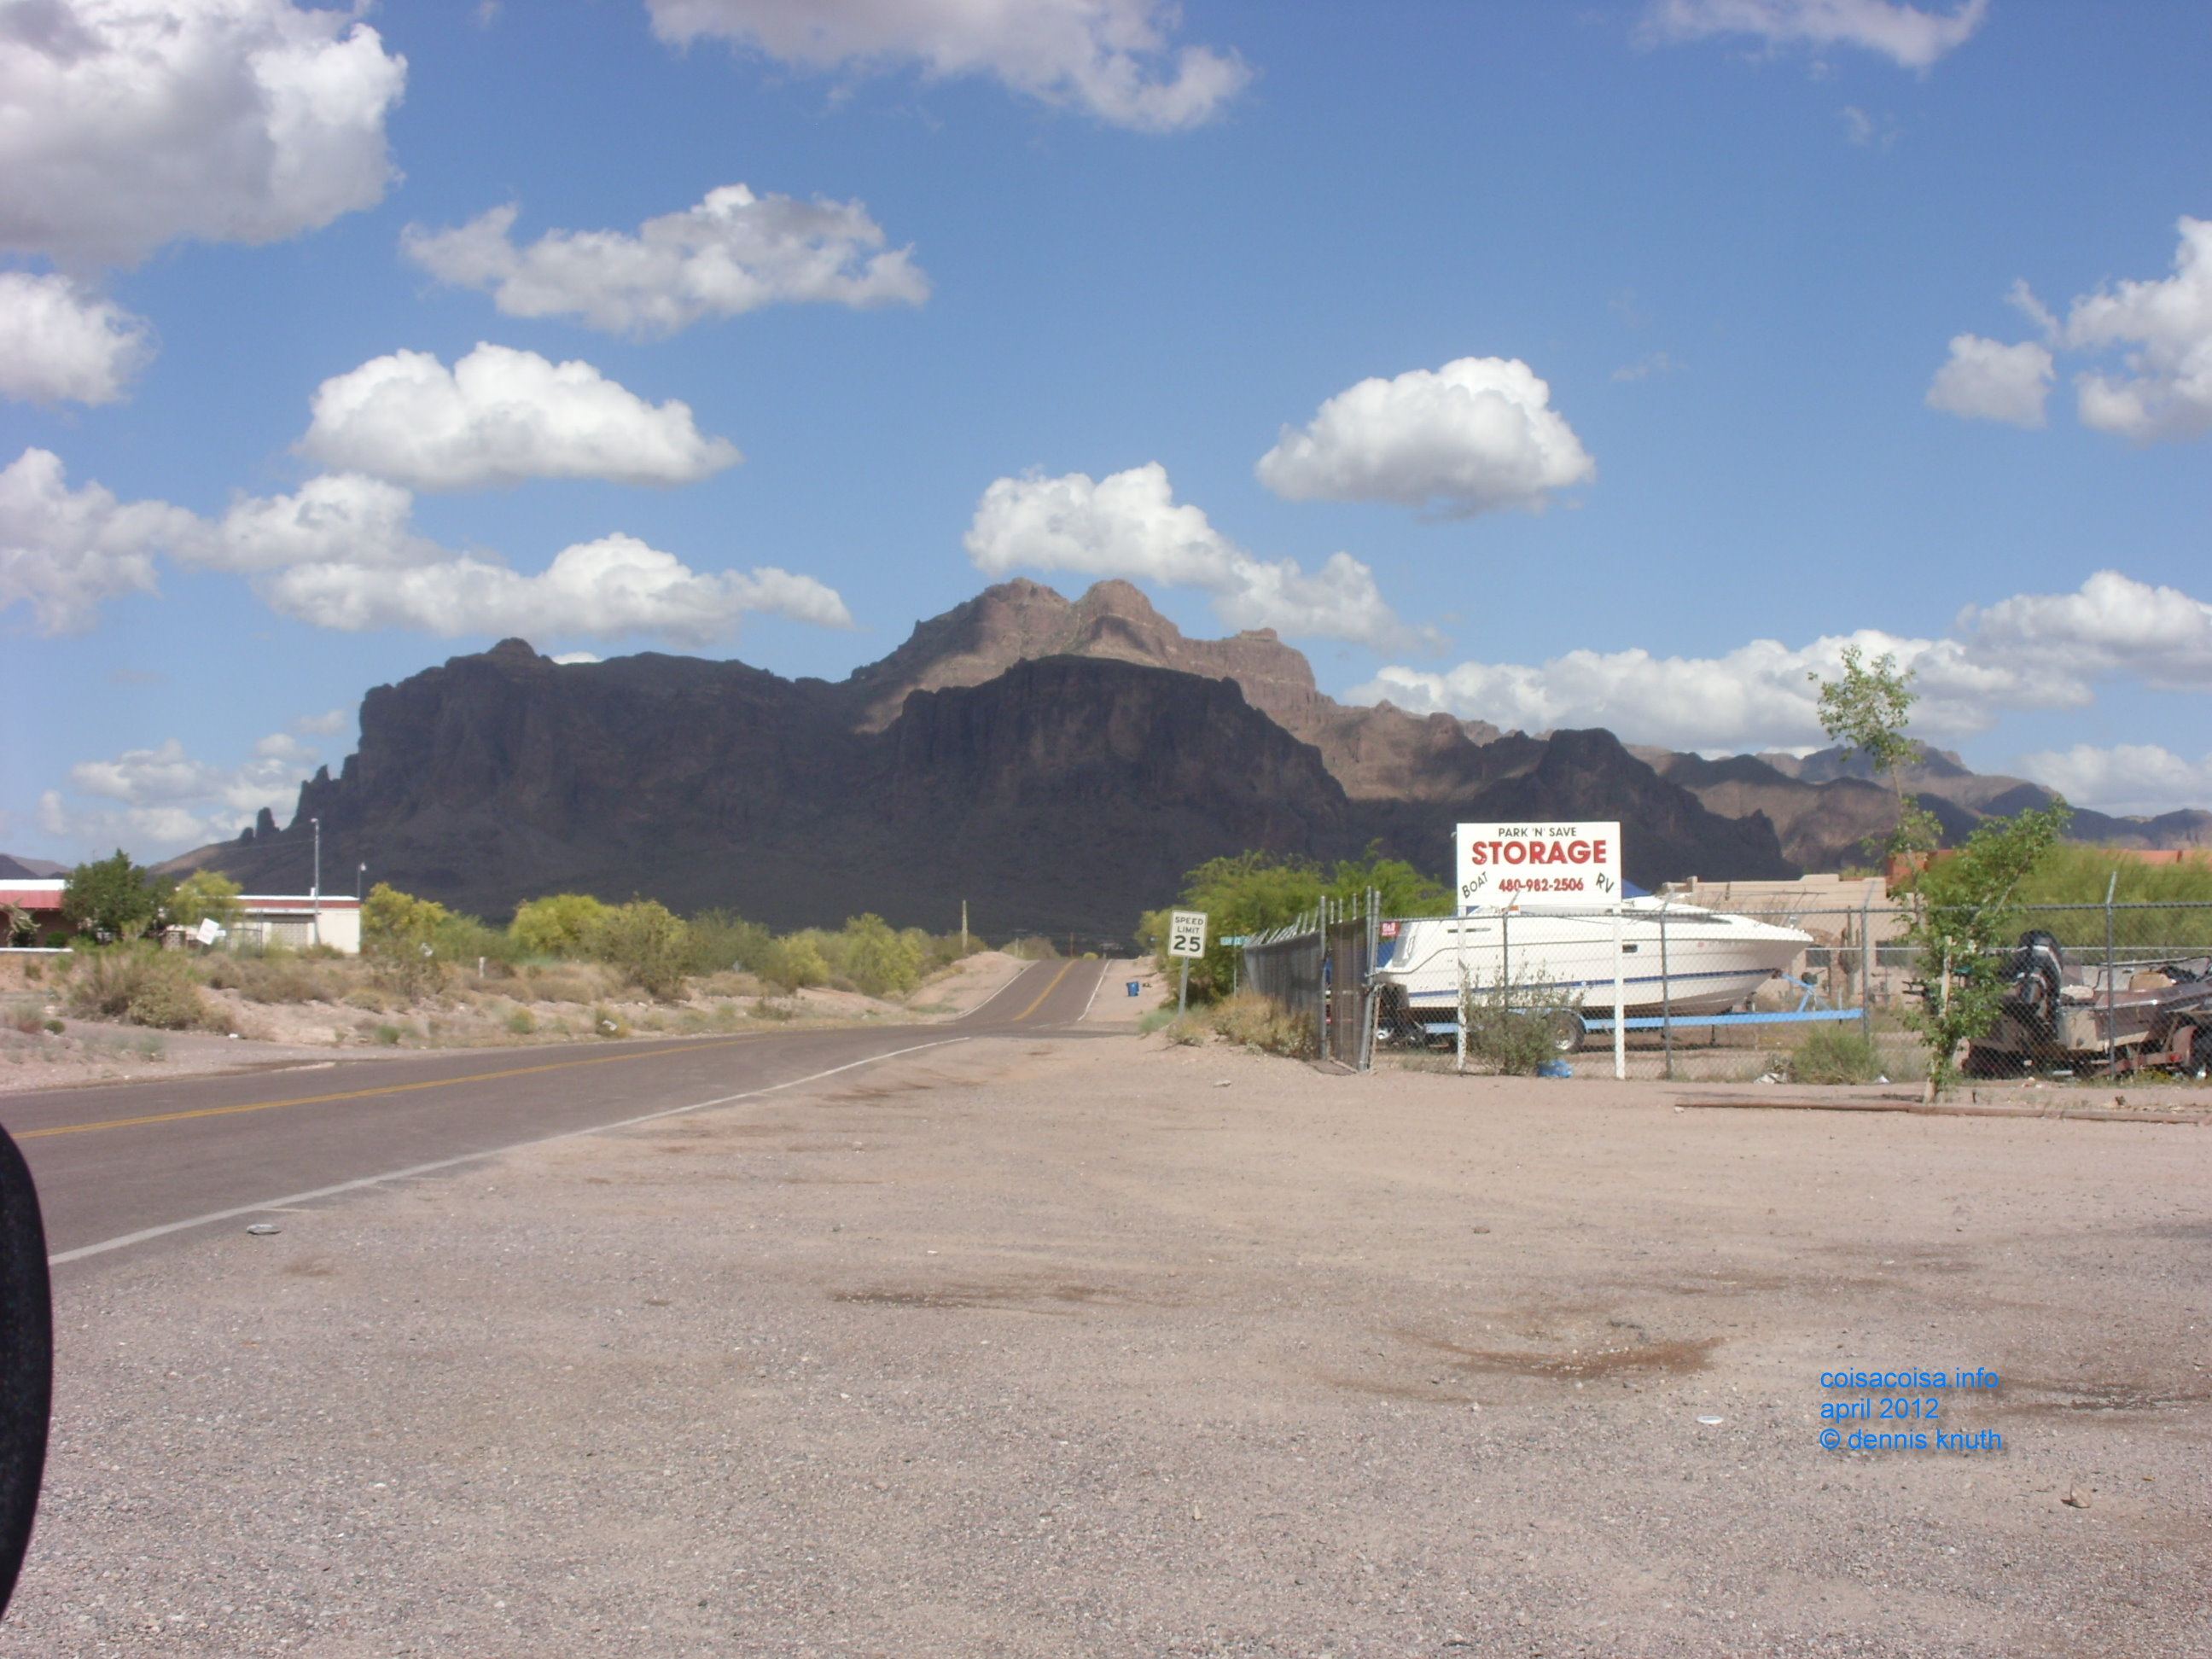 2012_04_26_e_apache_junction_ghost_town_0002.jpg (large)